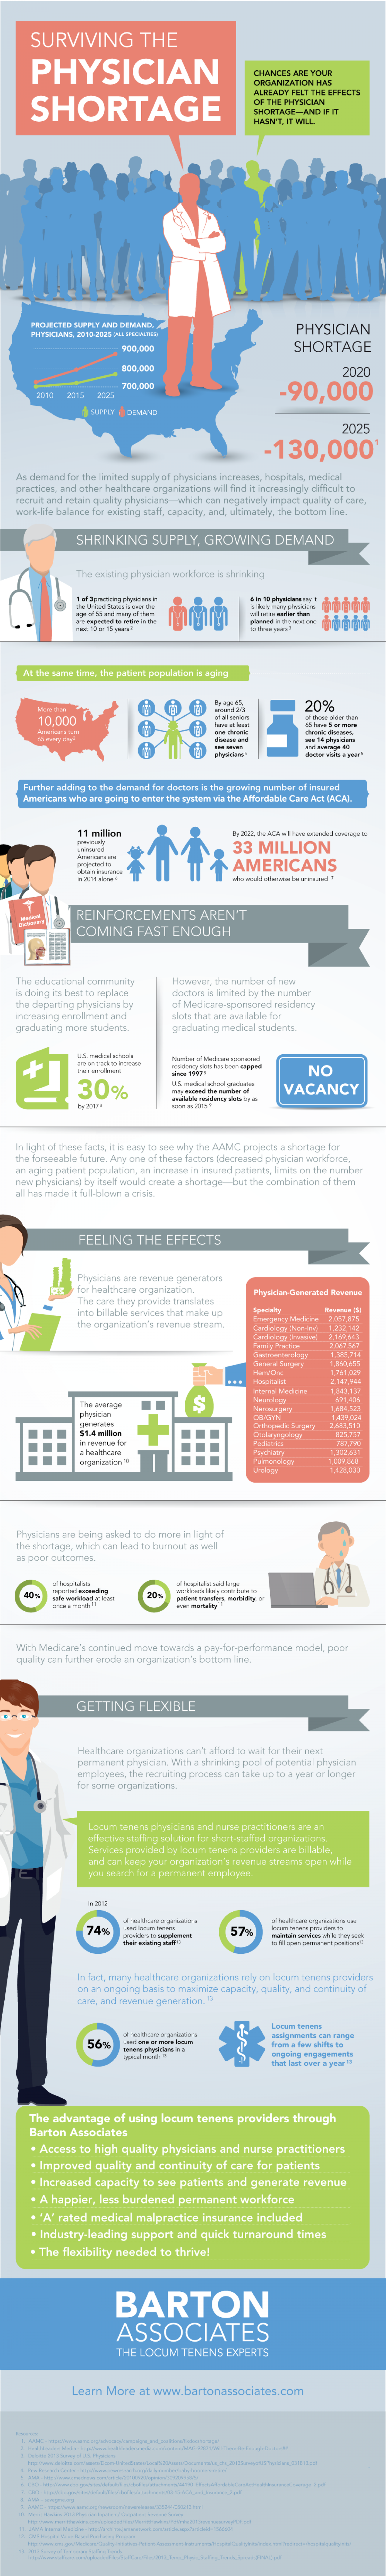 Surviving the Physician Shortage Infographic